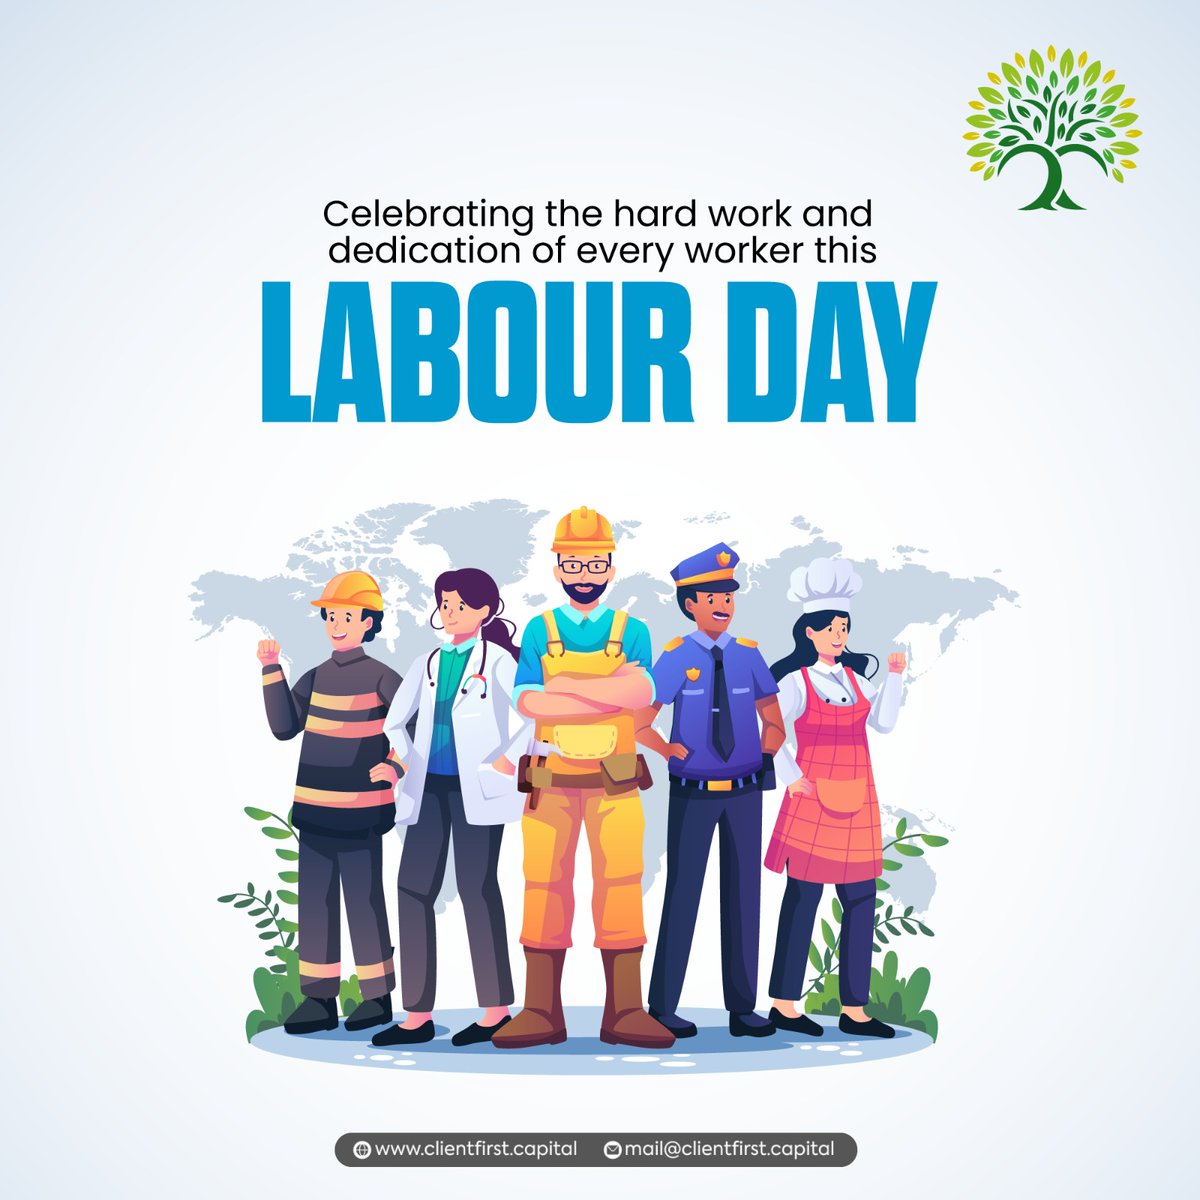 Recognizing the hardworking individuals who contribute to our country's success. Happy Labour Day to all those dedicated to making a difference! 💪🏼👷‍♂️

#clientfirstcapital #LaborDay #HardWorkers #CelebrateWork #ThankYouWorkers #BuildingNation #HonorLabor #EmpowerEmployees